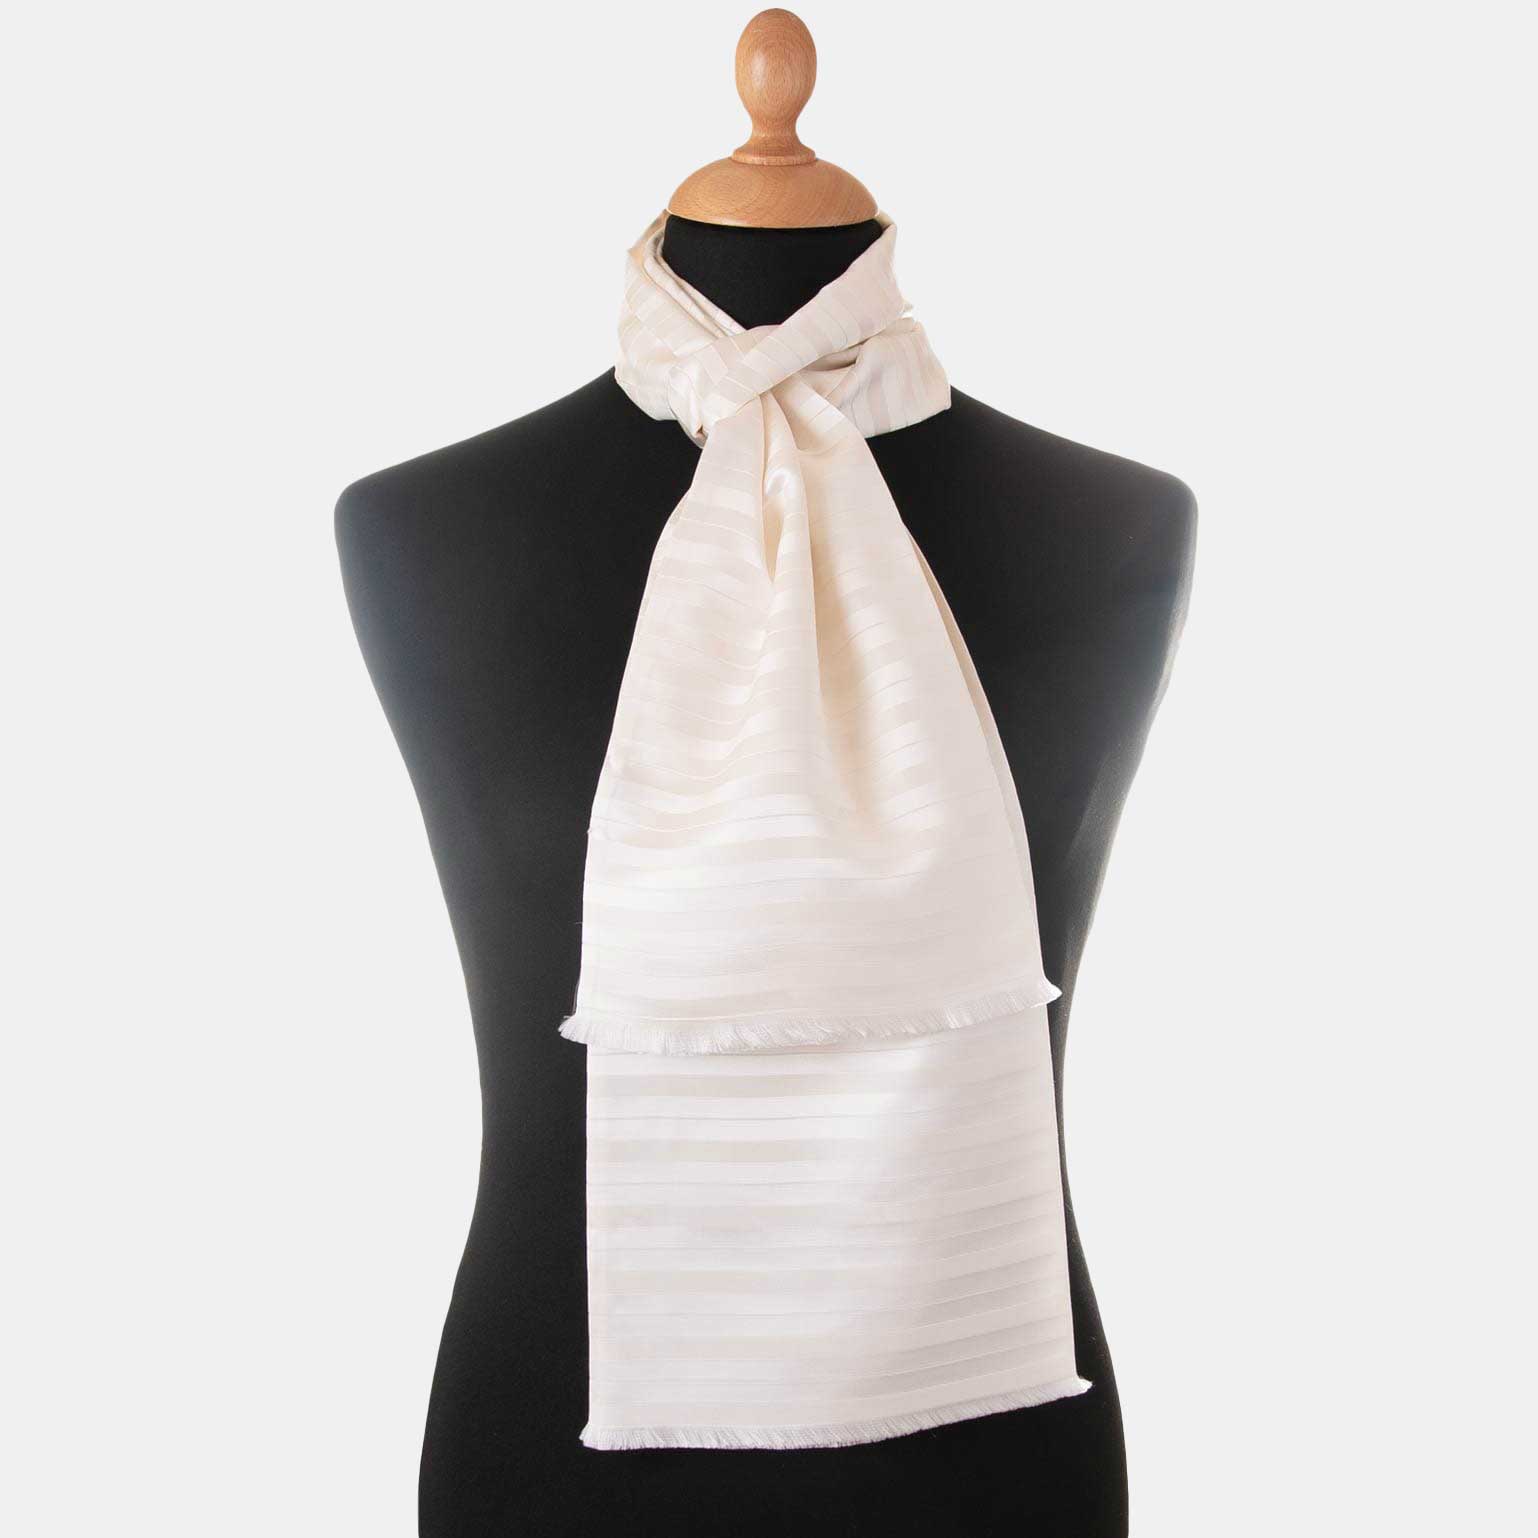 A high quality LV scarf. It's simple and luxuries and goes with